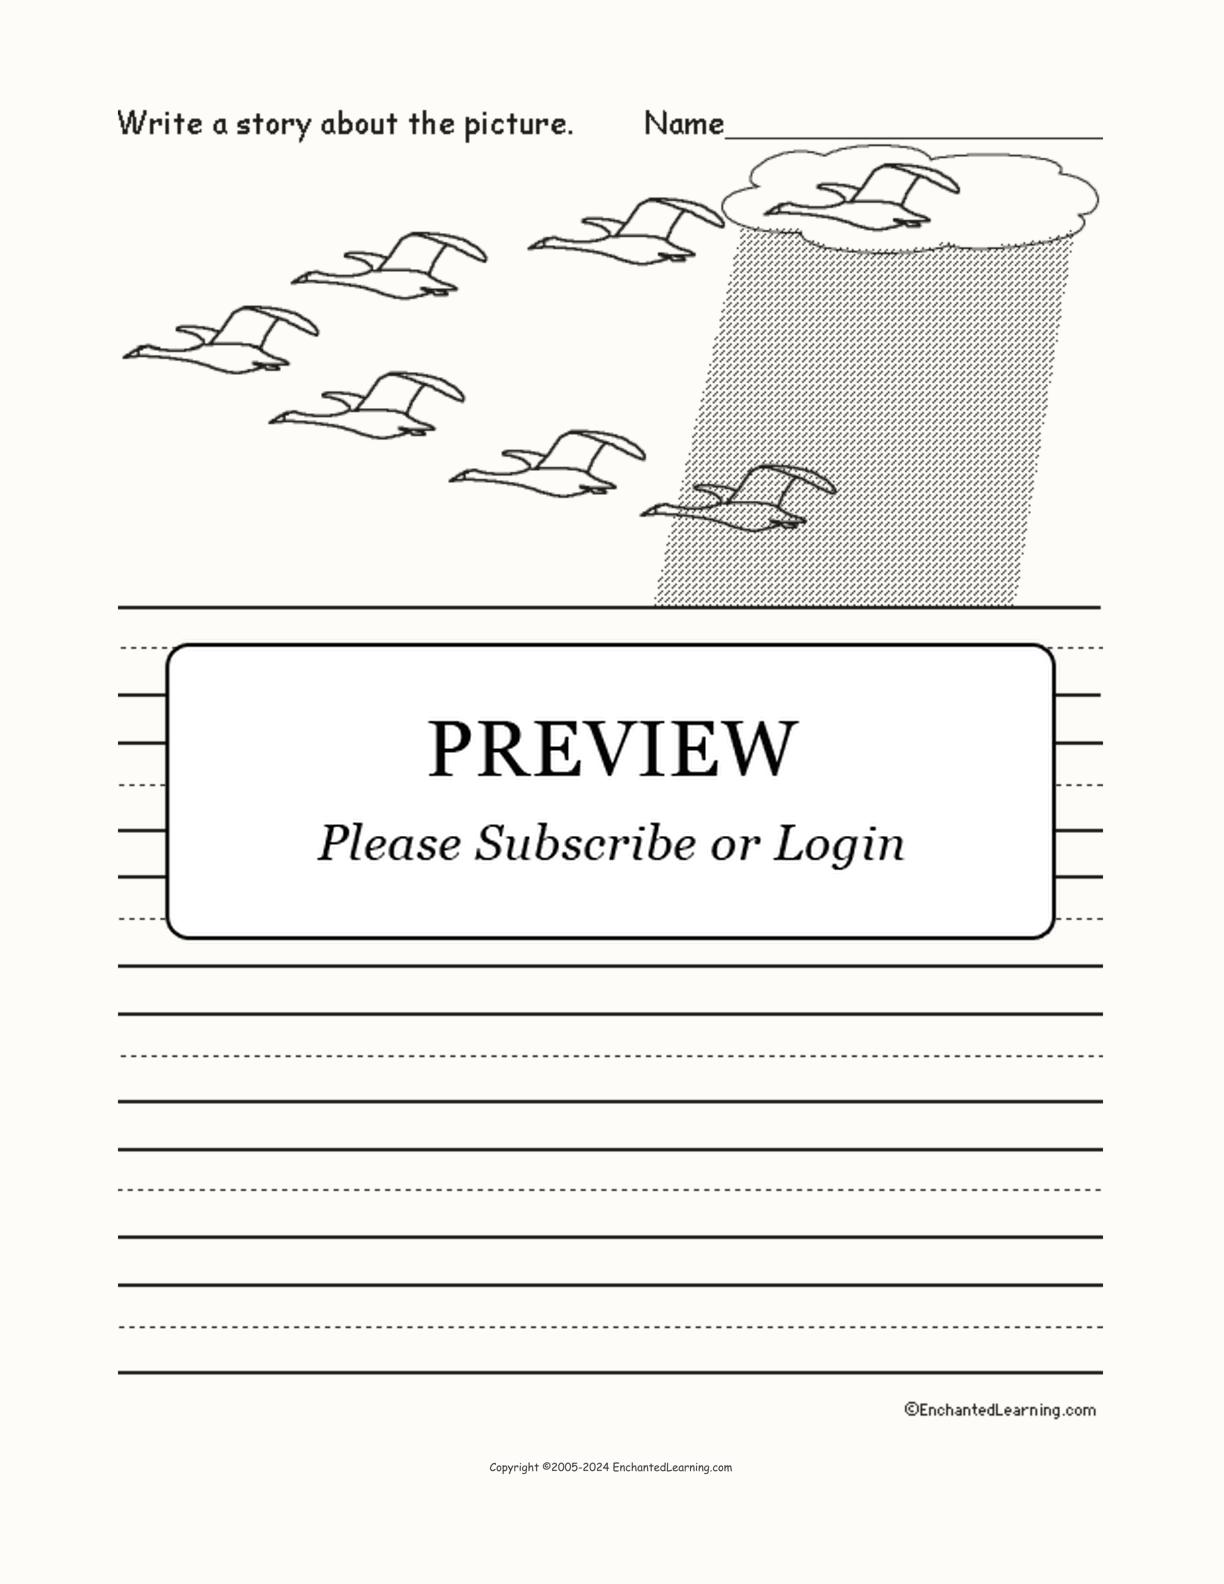 Picture Prompts - Migrating Birds interactive worksheet page 1